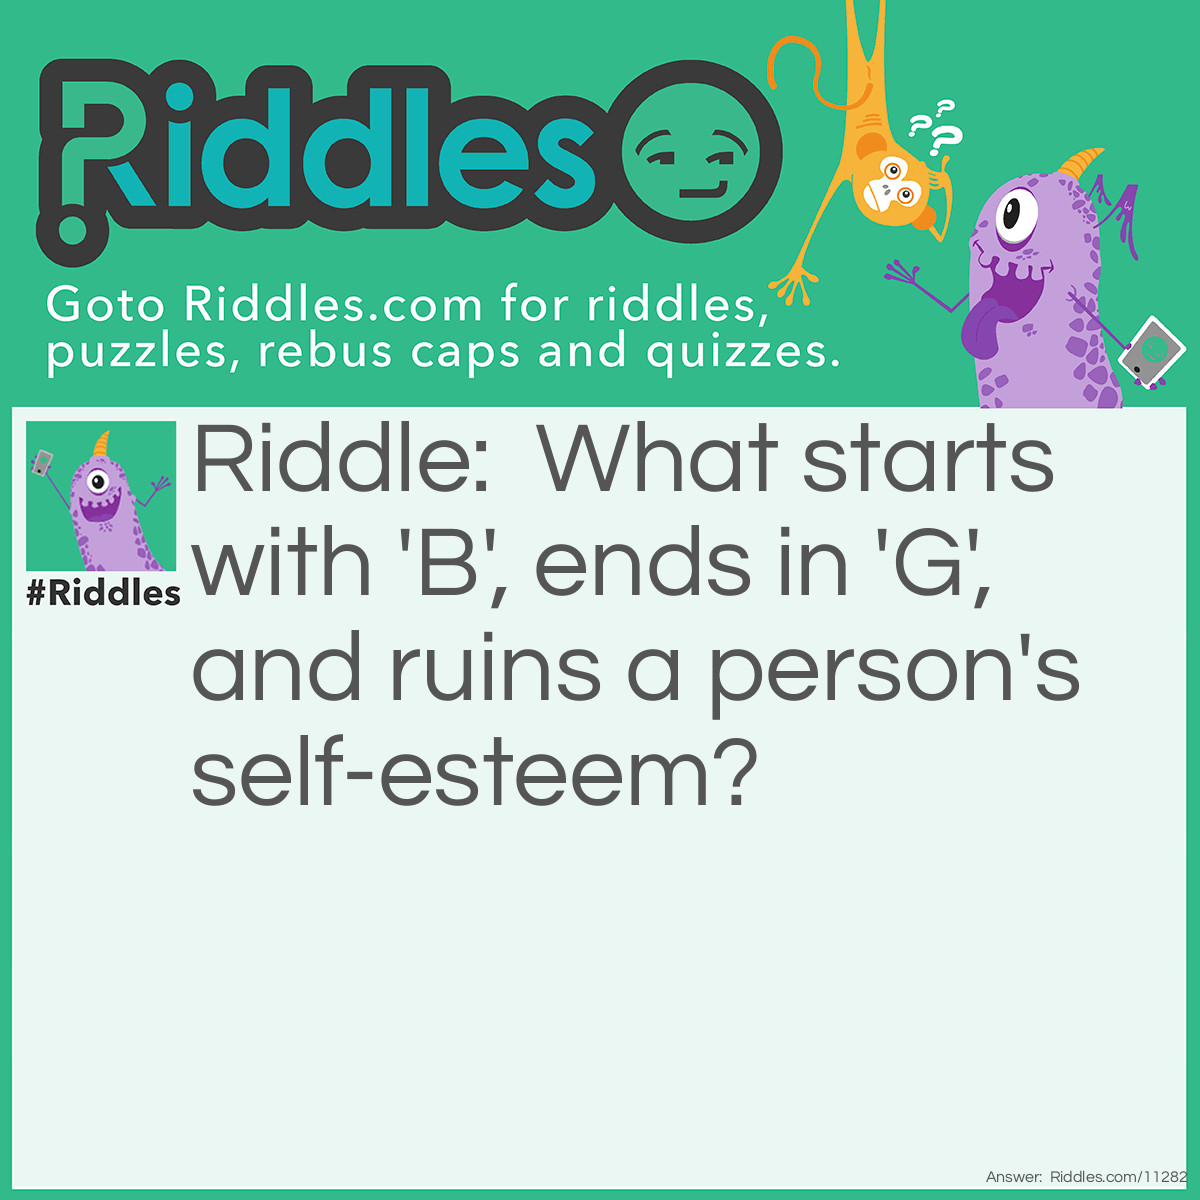 Riddle: What starts with 'B', ends in 'G', and ruins a person's self-esteem? Answer: Bullying.